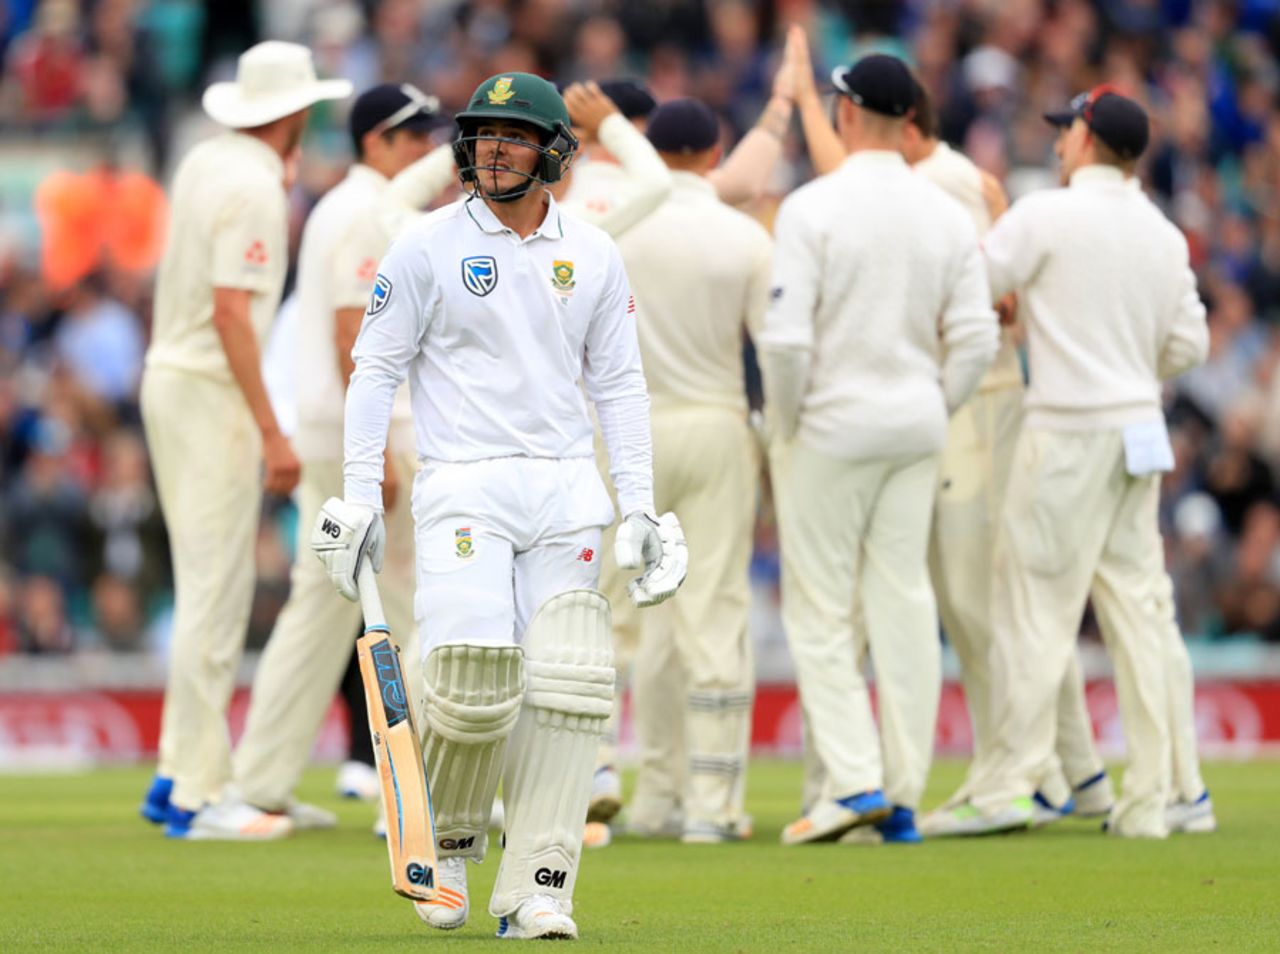 Quinton de Kock walks off after making 17, England v South Africa, 3rd Investec Test, The Oval, 2nd day, July 28, 2017